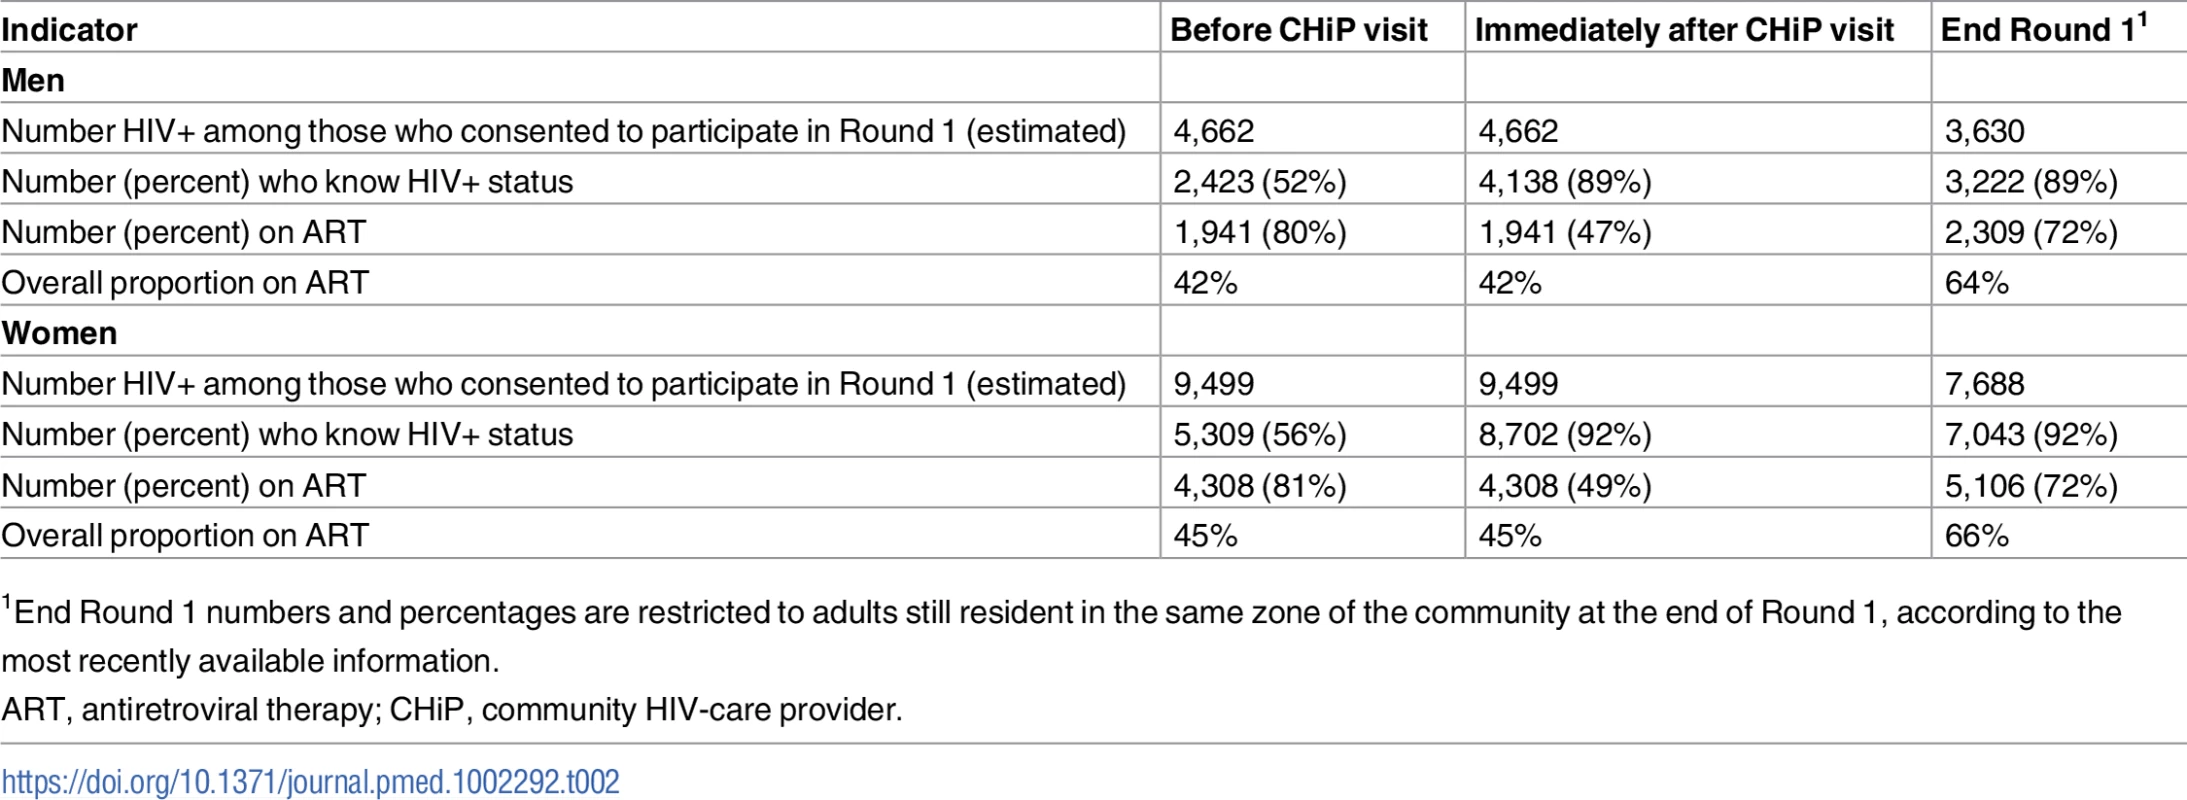 Estimated proportions of HIV+ individuals who knew their status and who were on ART before the CHiP visit, immediately after the CHiP visit, and at the end of Round 1, in those consenting to the intervention.